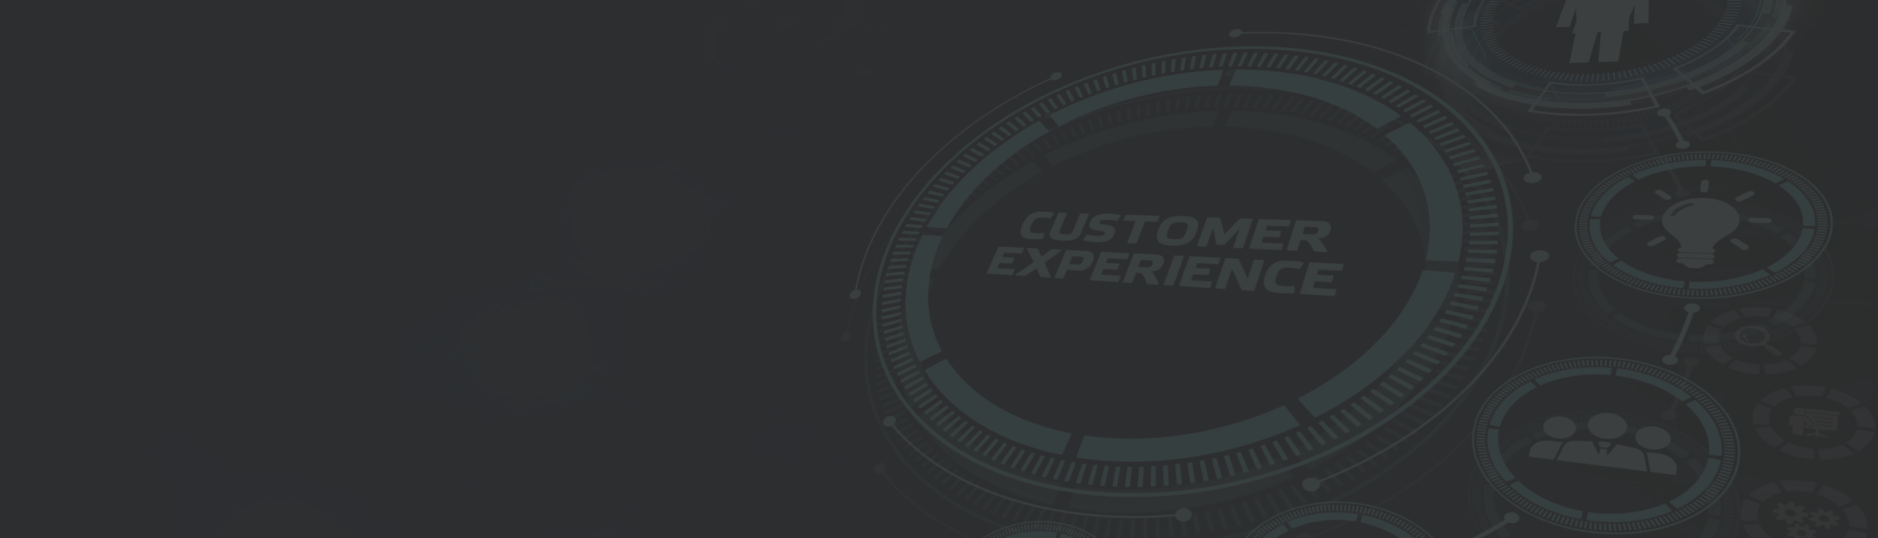 Customer Experience Banner